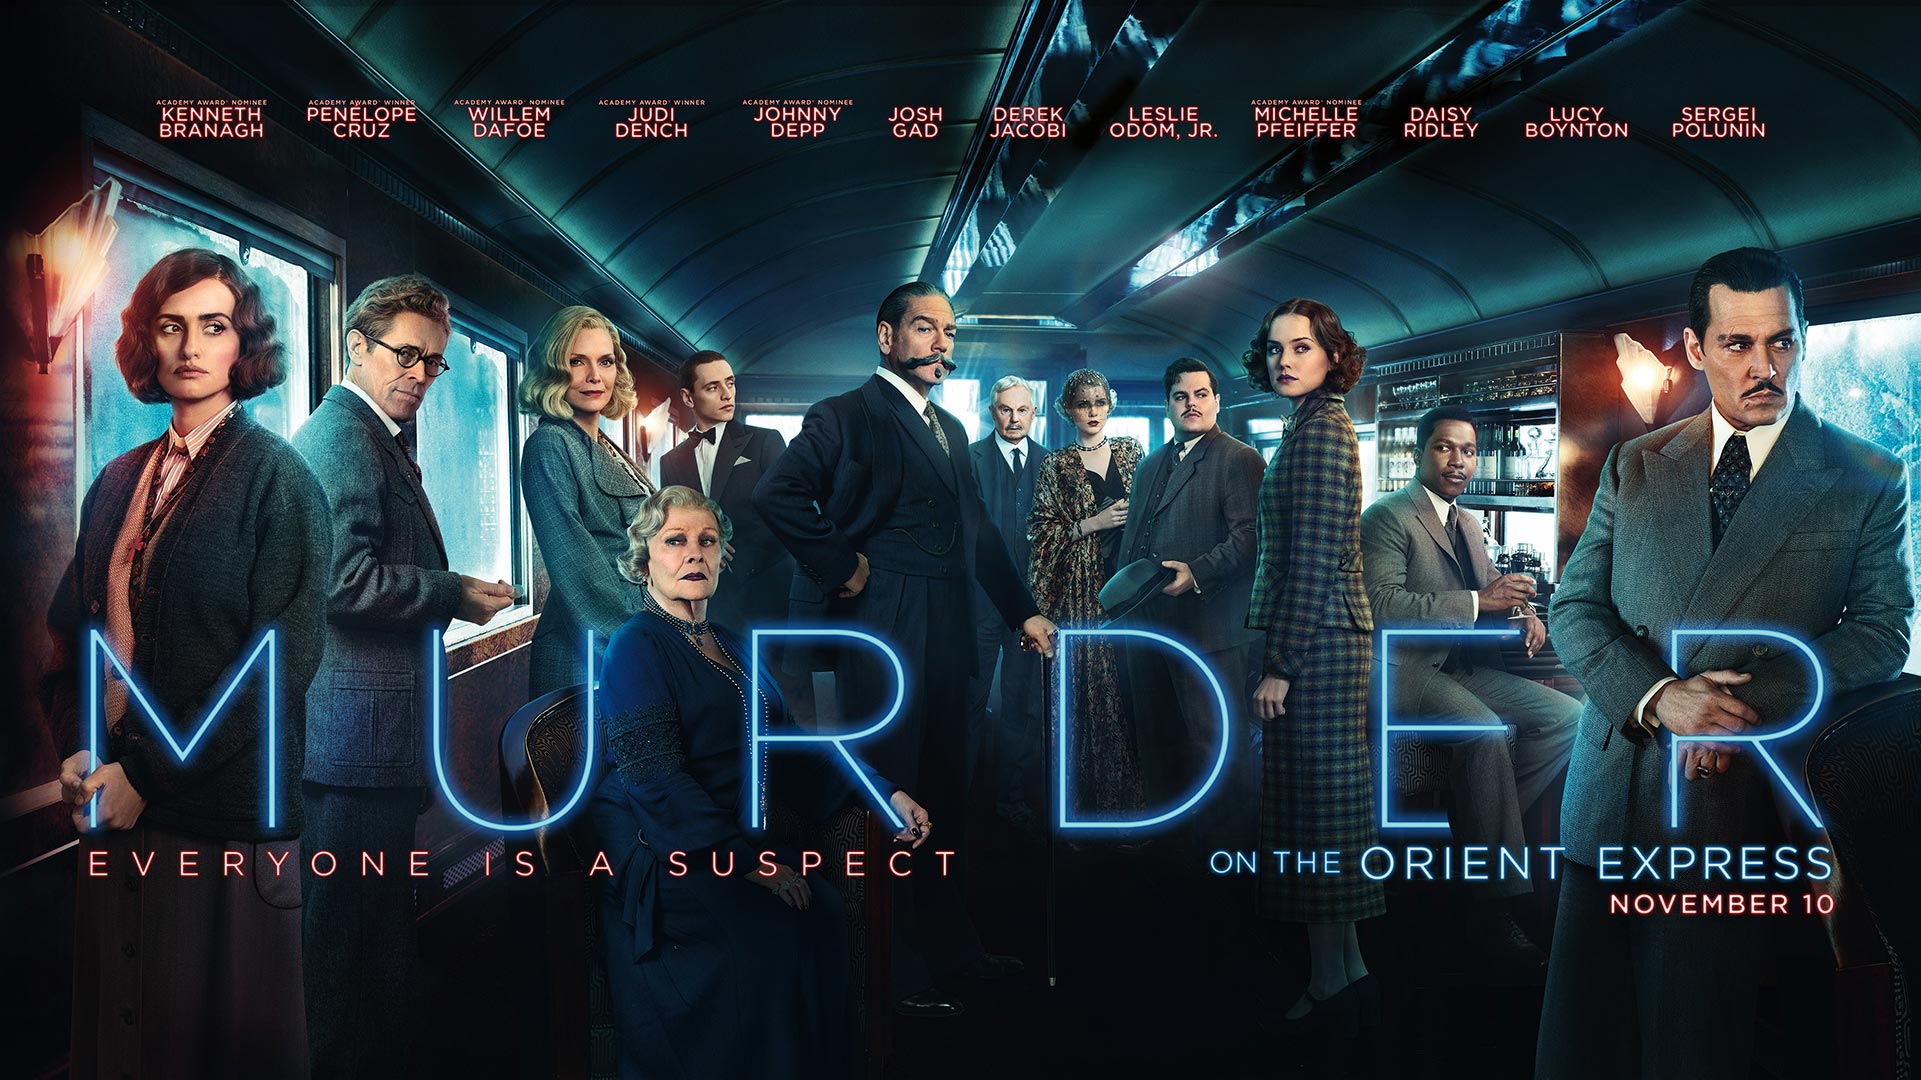 UAV and Murder on the Orient Express